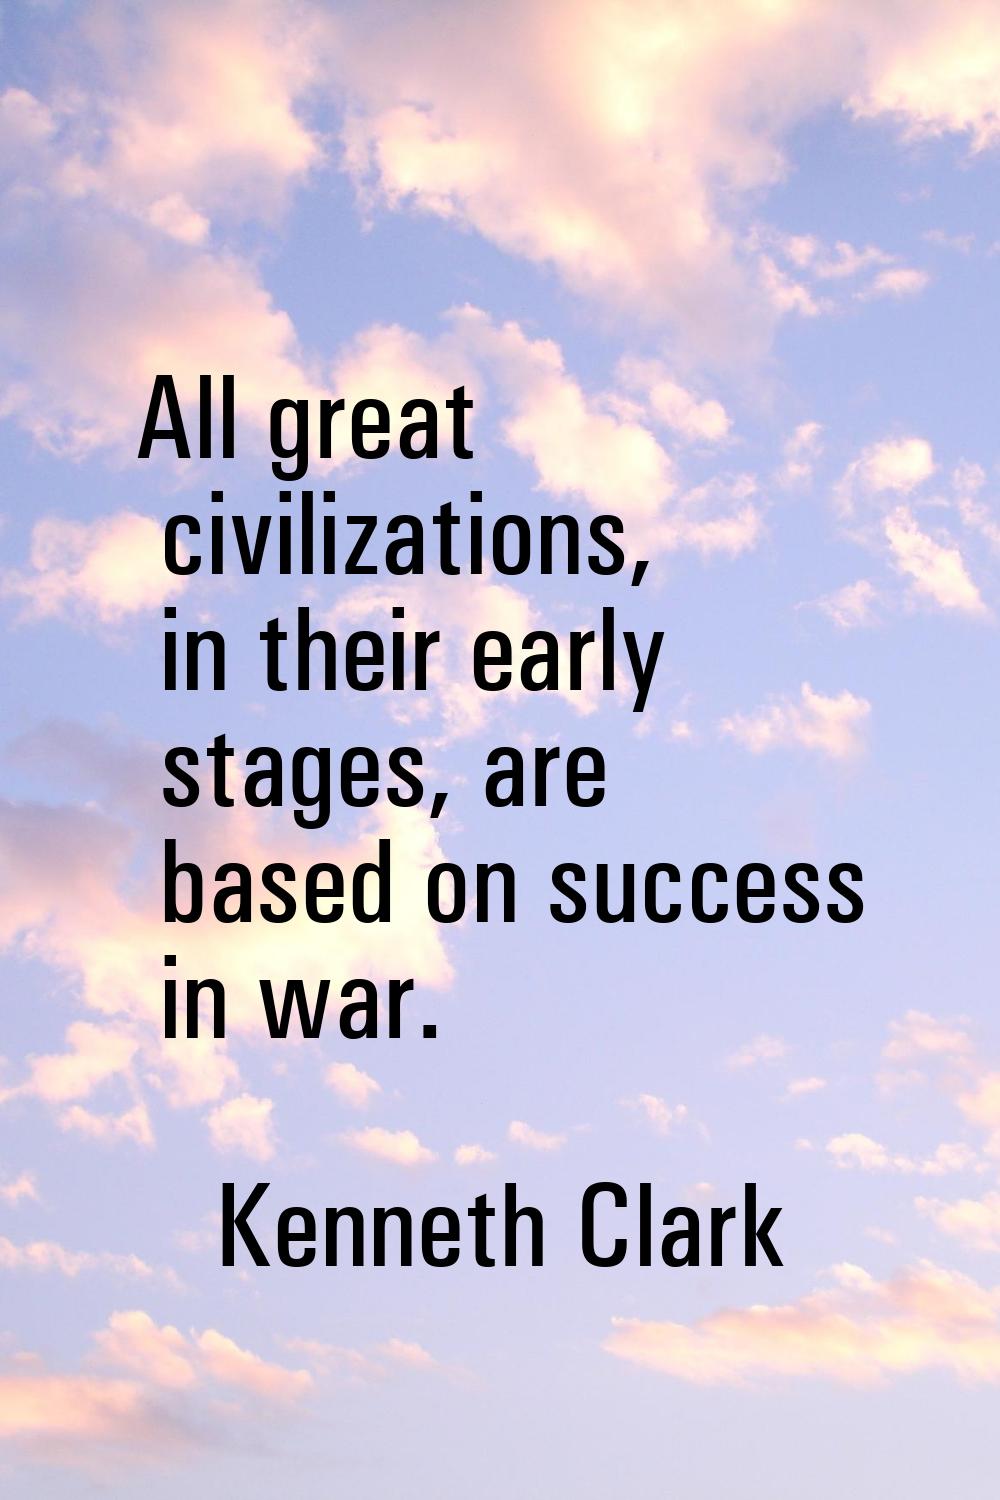 All great civilizations, in their early stages, are based on success in war.